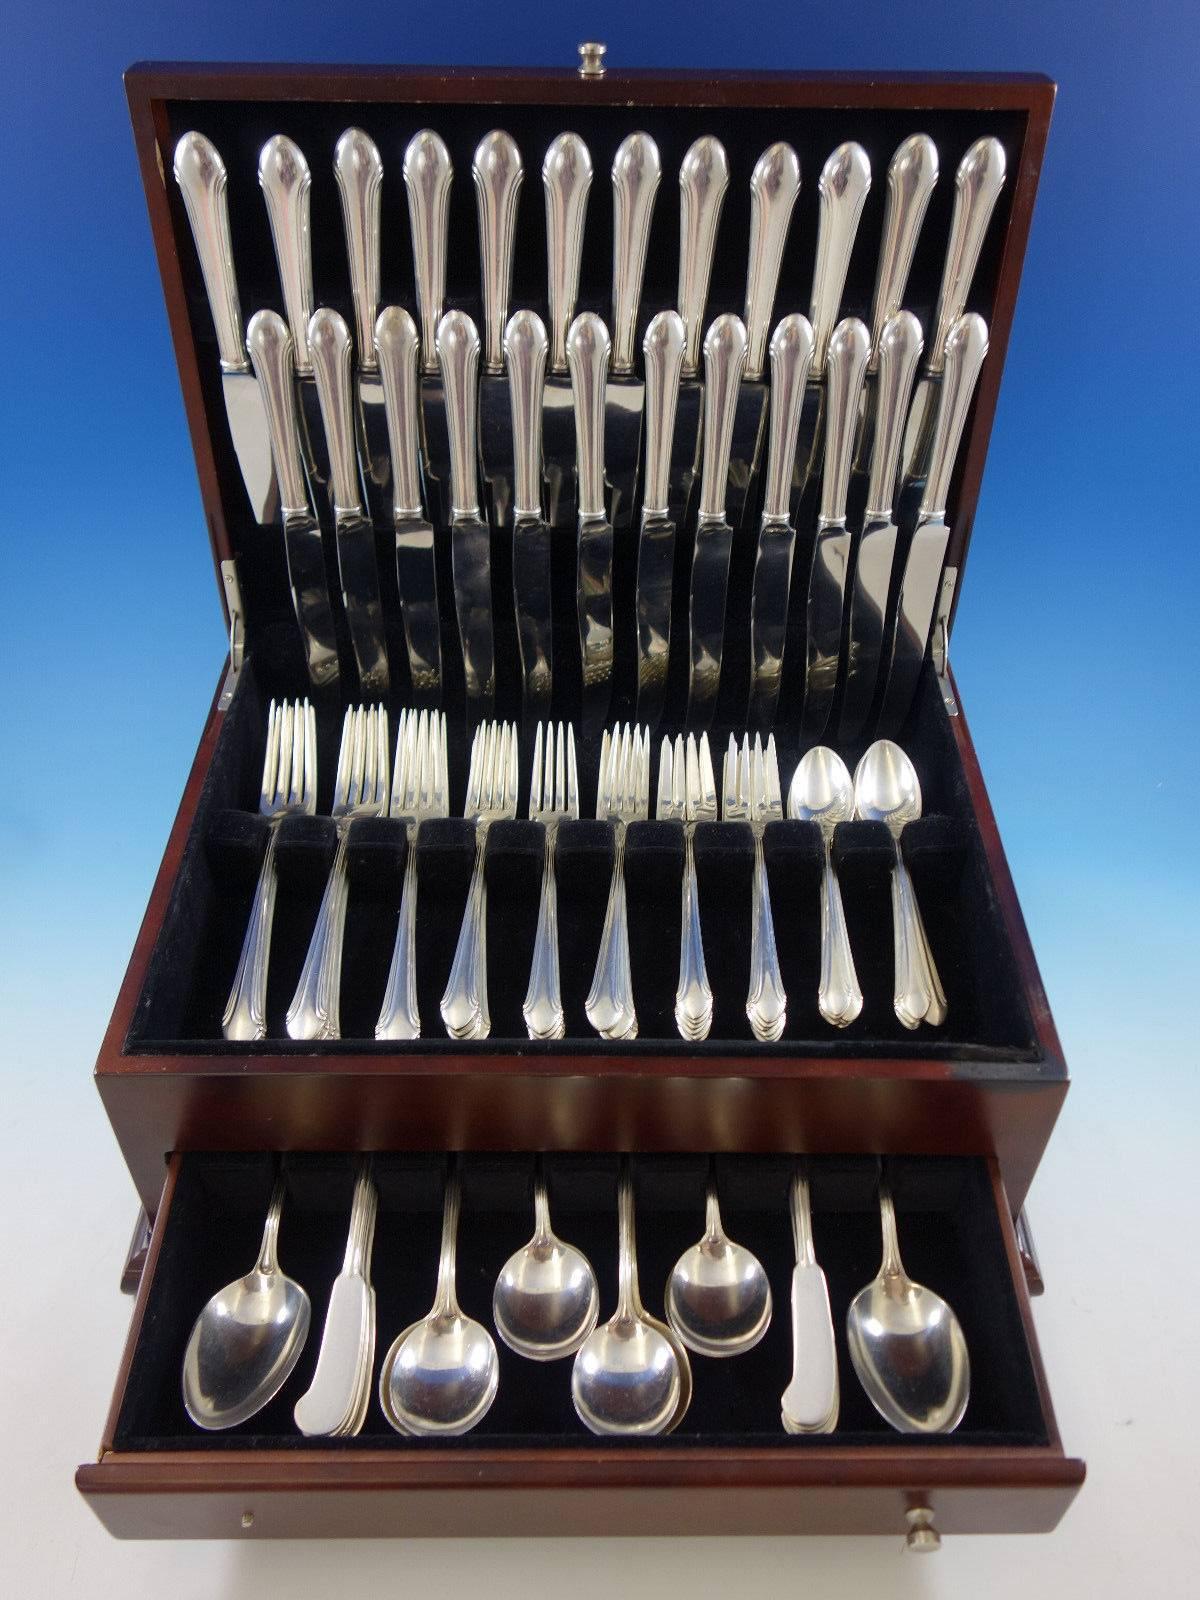 Dinner and lunch size Romantique by Alvin sterling silver flatware set, 98 pieces. This set includes: 

12 dinner knives, 9 5/8